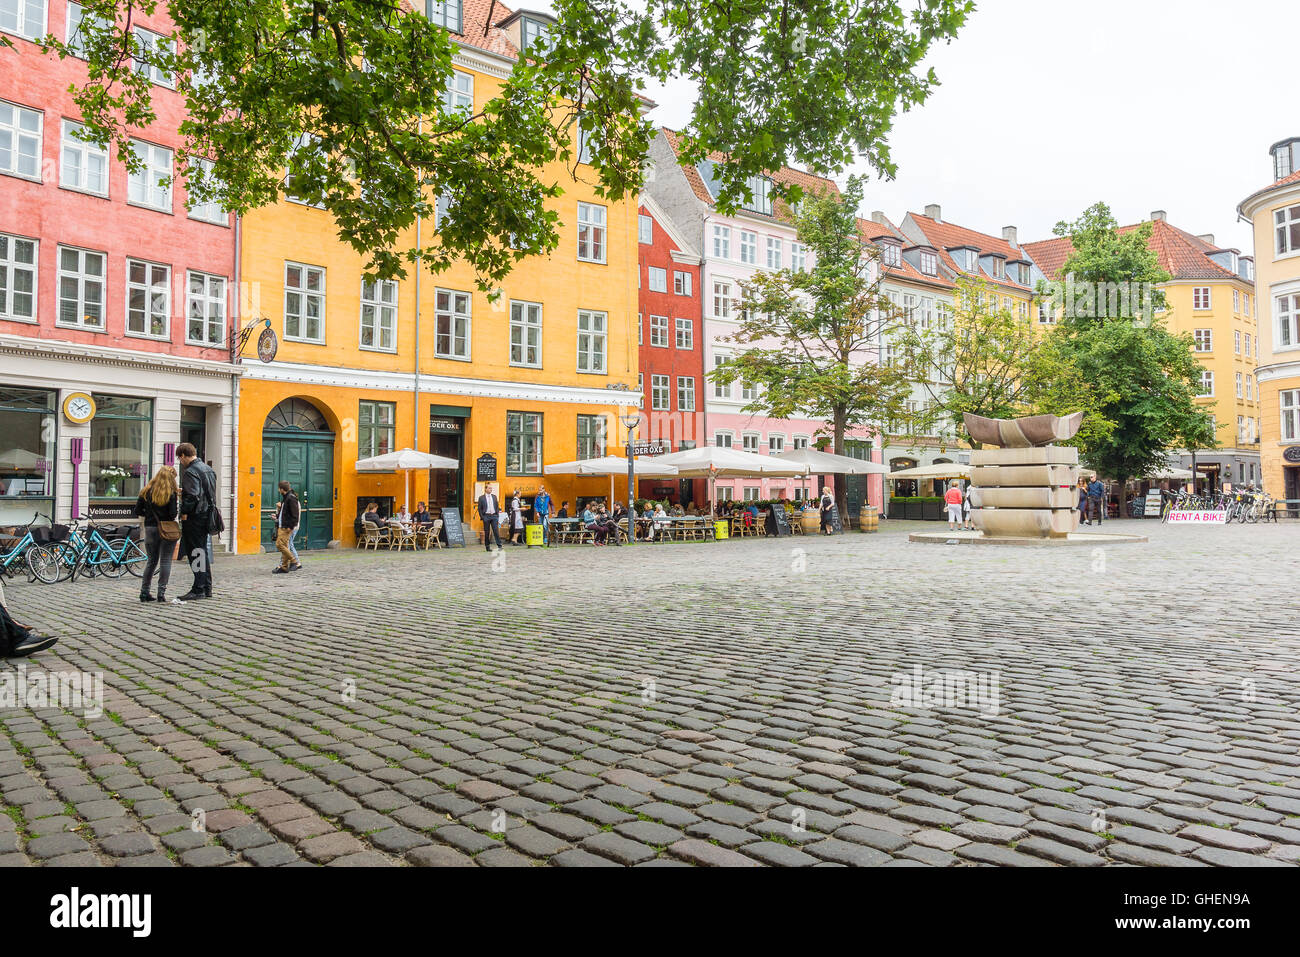 People walking around at the Grabrodretorv, a public square with colourful houses and restaurants in the centre of Copenhagen Stock Photo